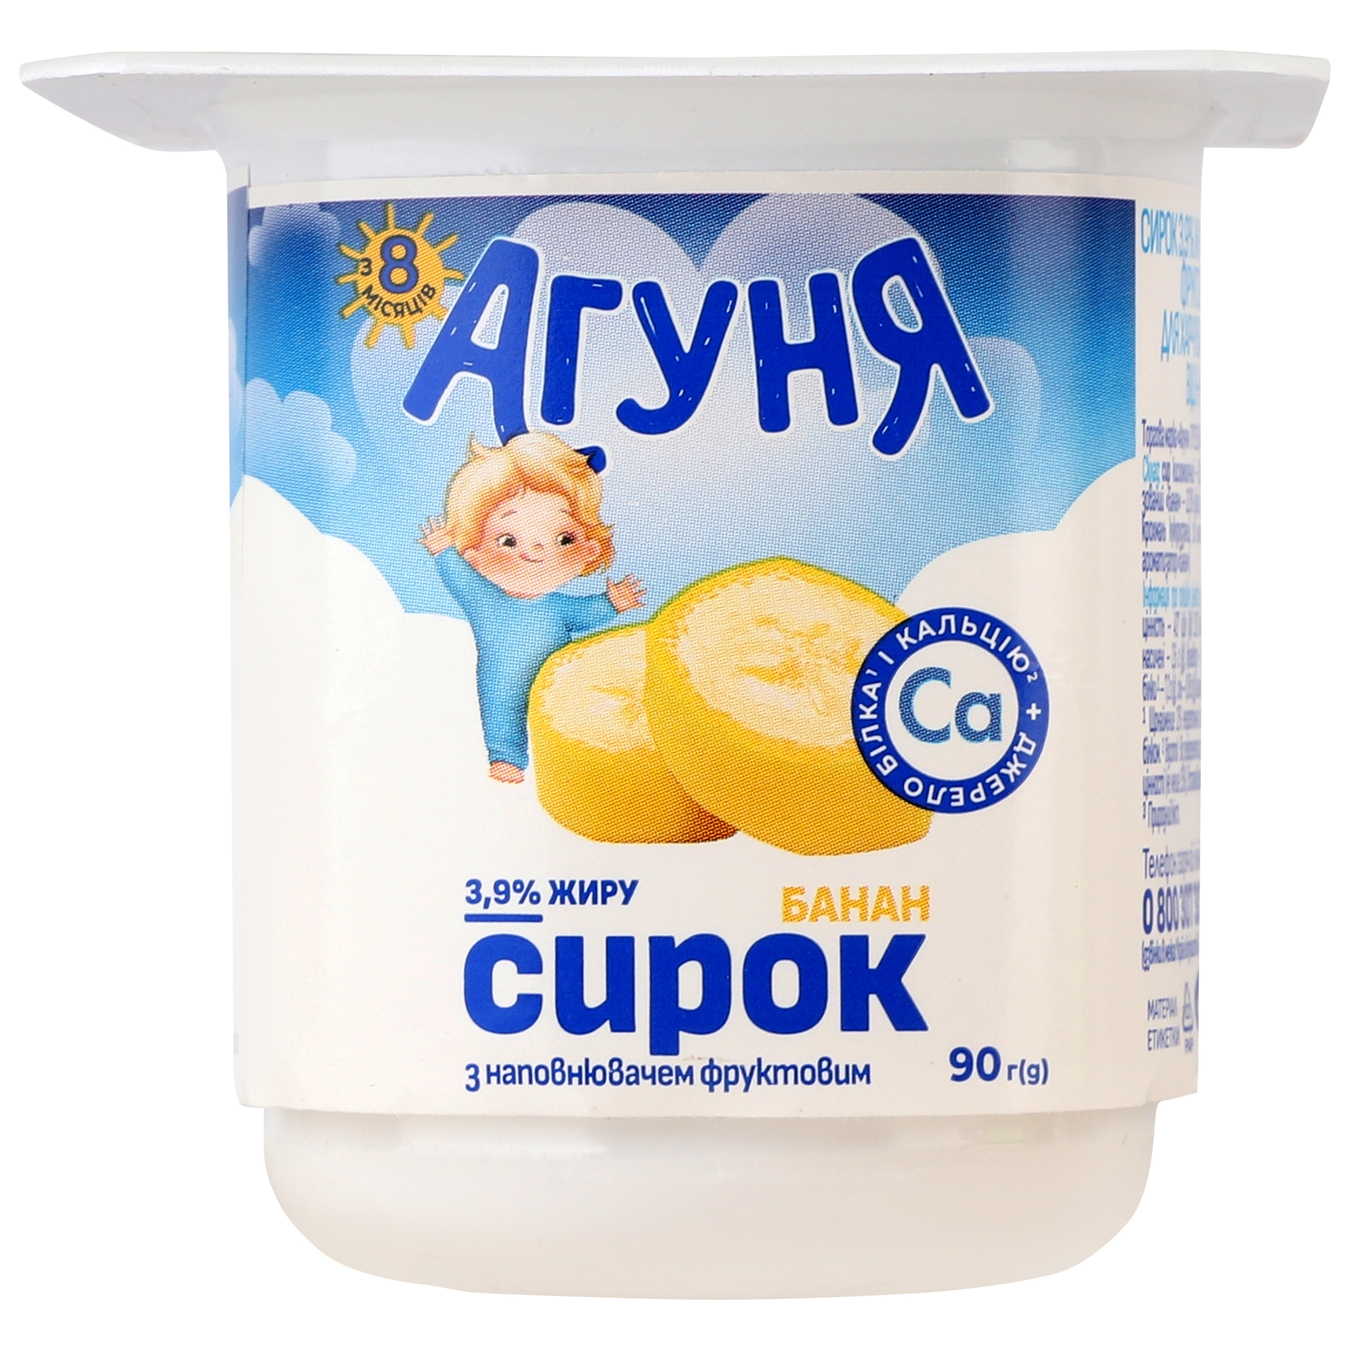 Agunya Banana cottage cheese for feeding children aged 8 months and over 3.9% 90g